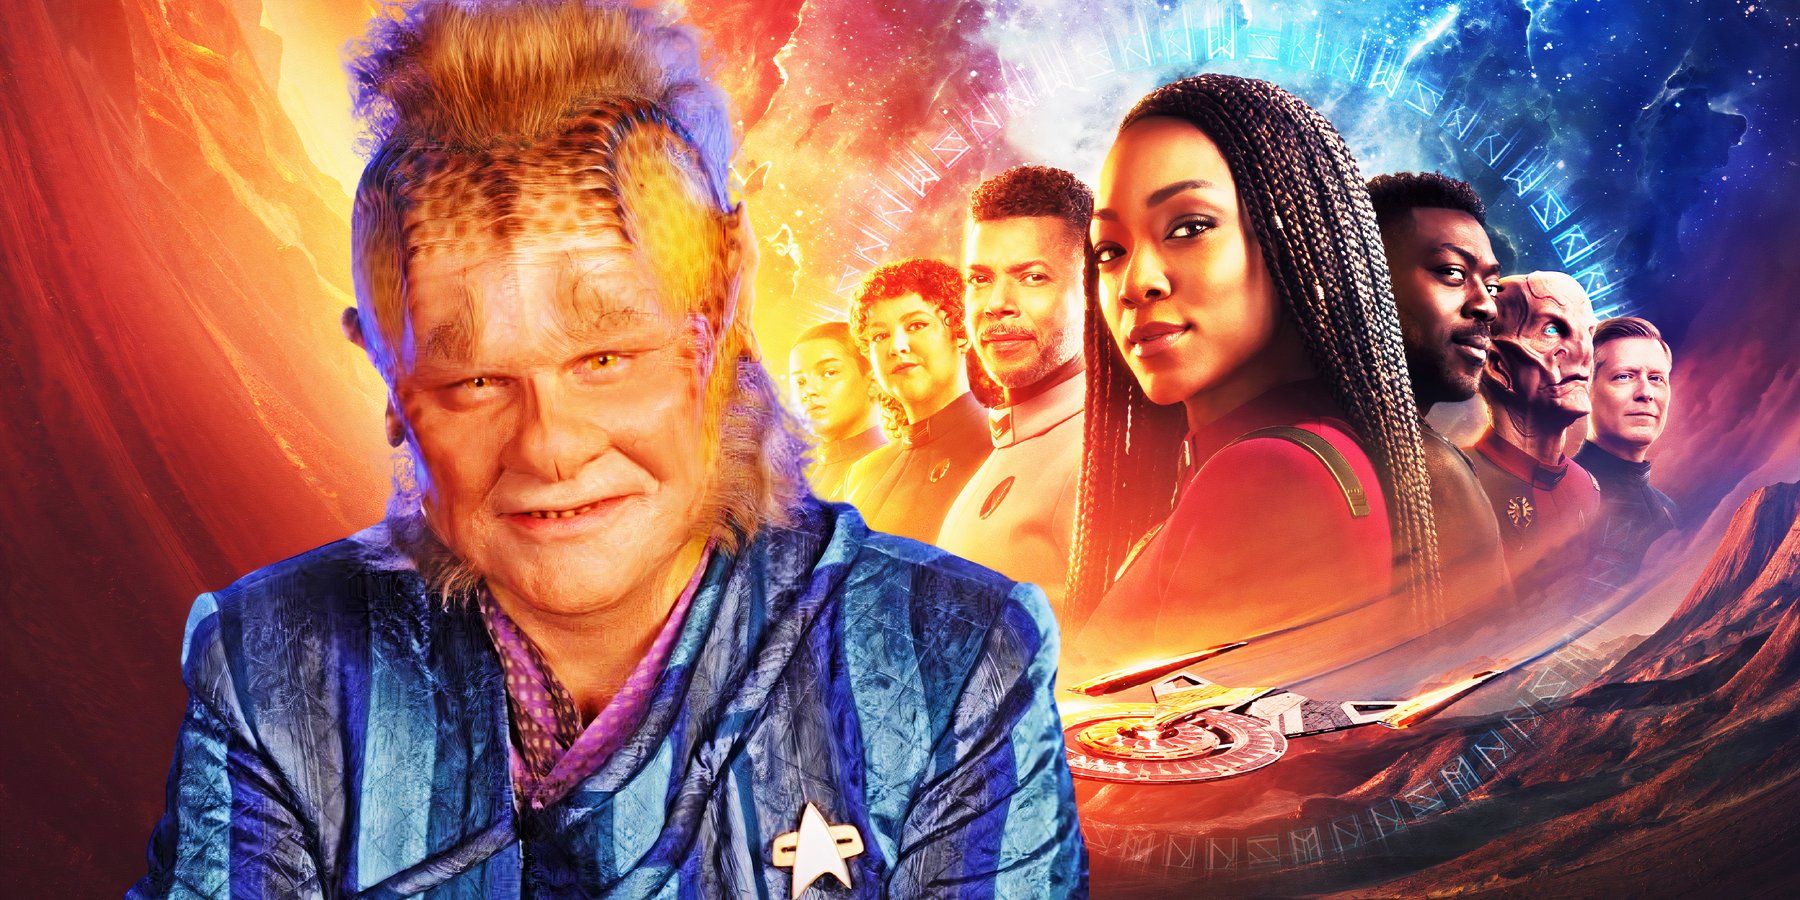 Neelix and the cast of Star Trek: Discovery